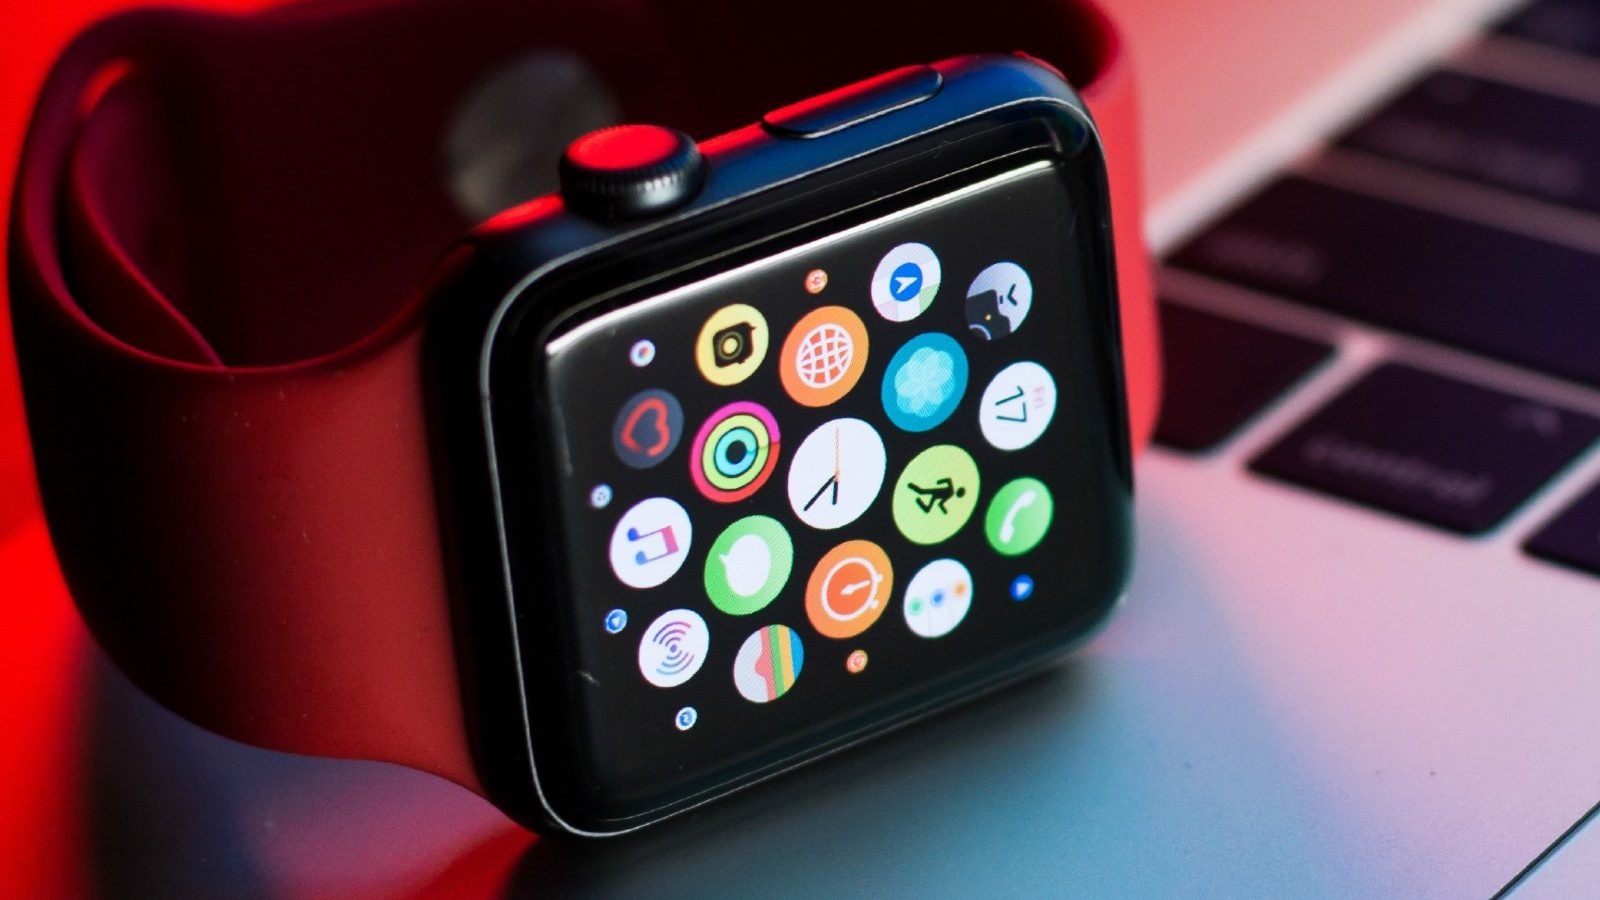 Apple Watch Extreme Sports Model Price Tag Could Be Over A Lakh